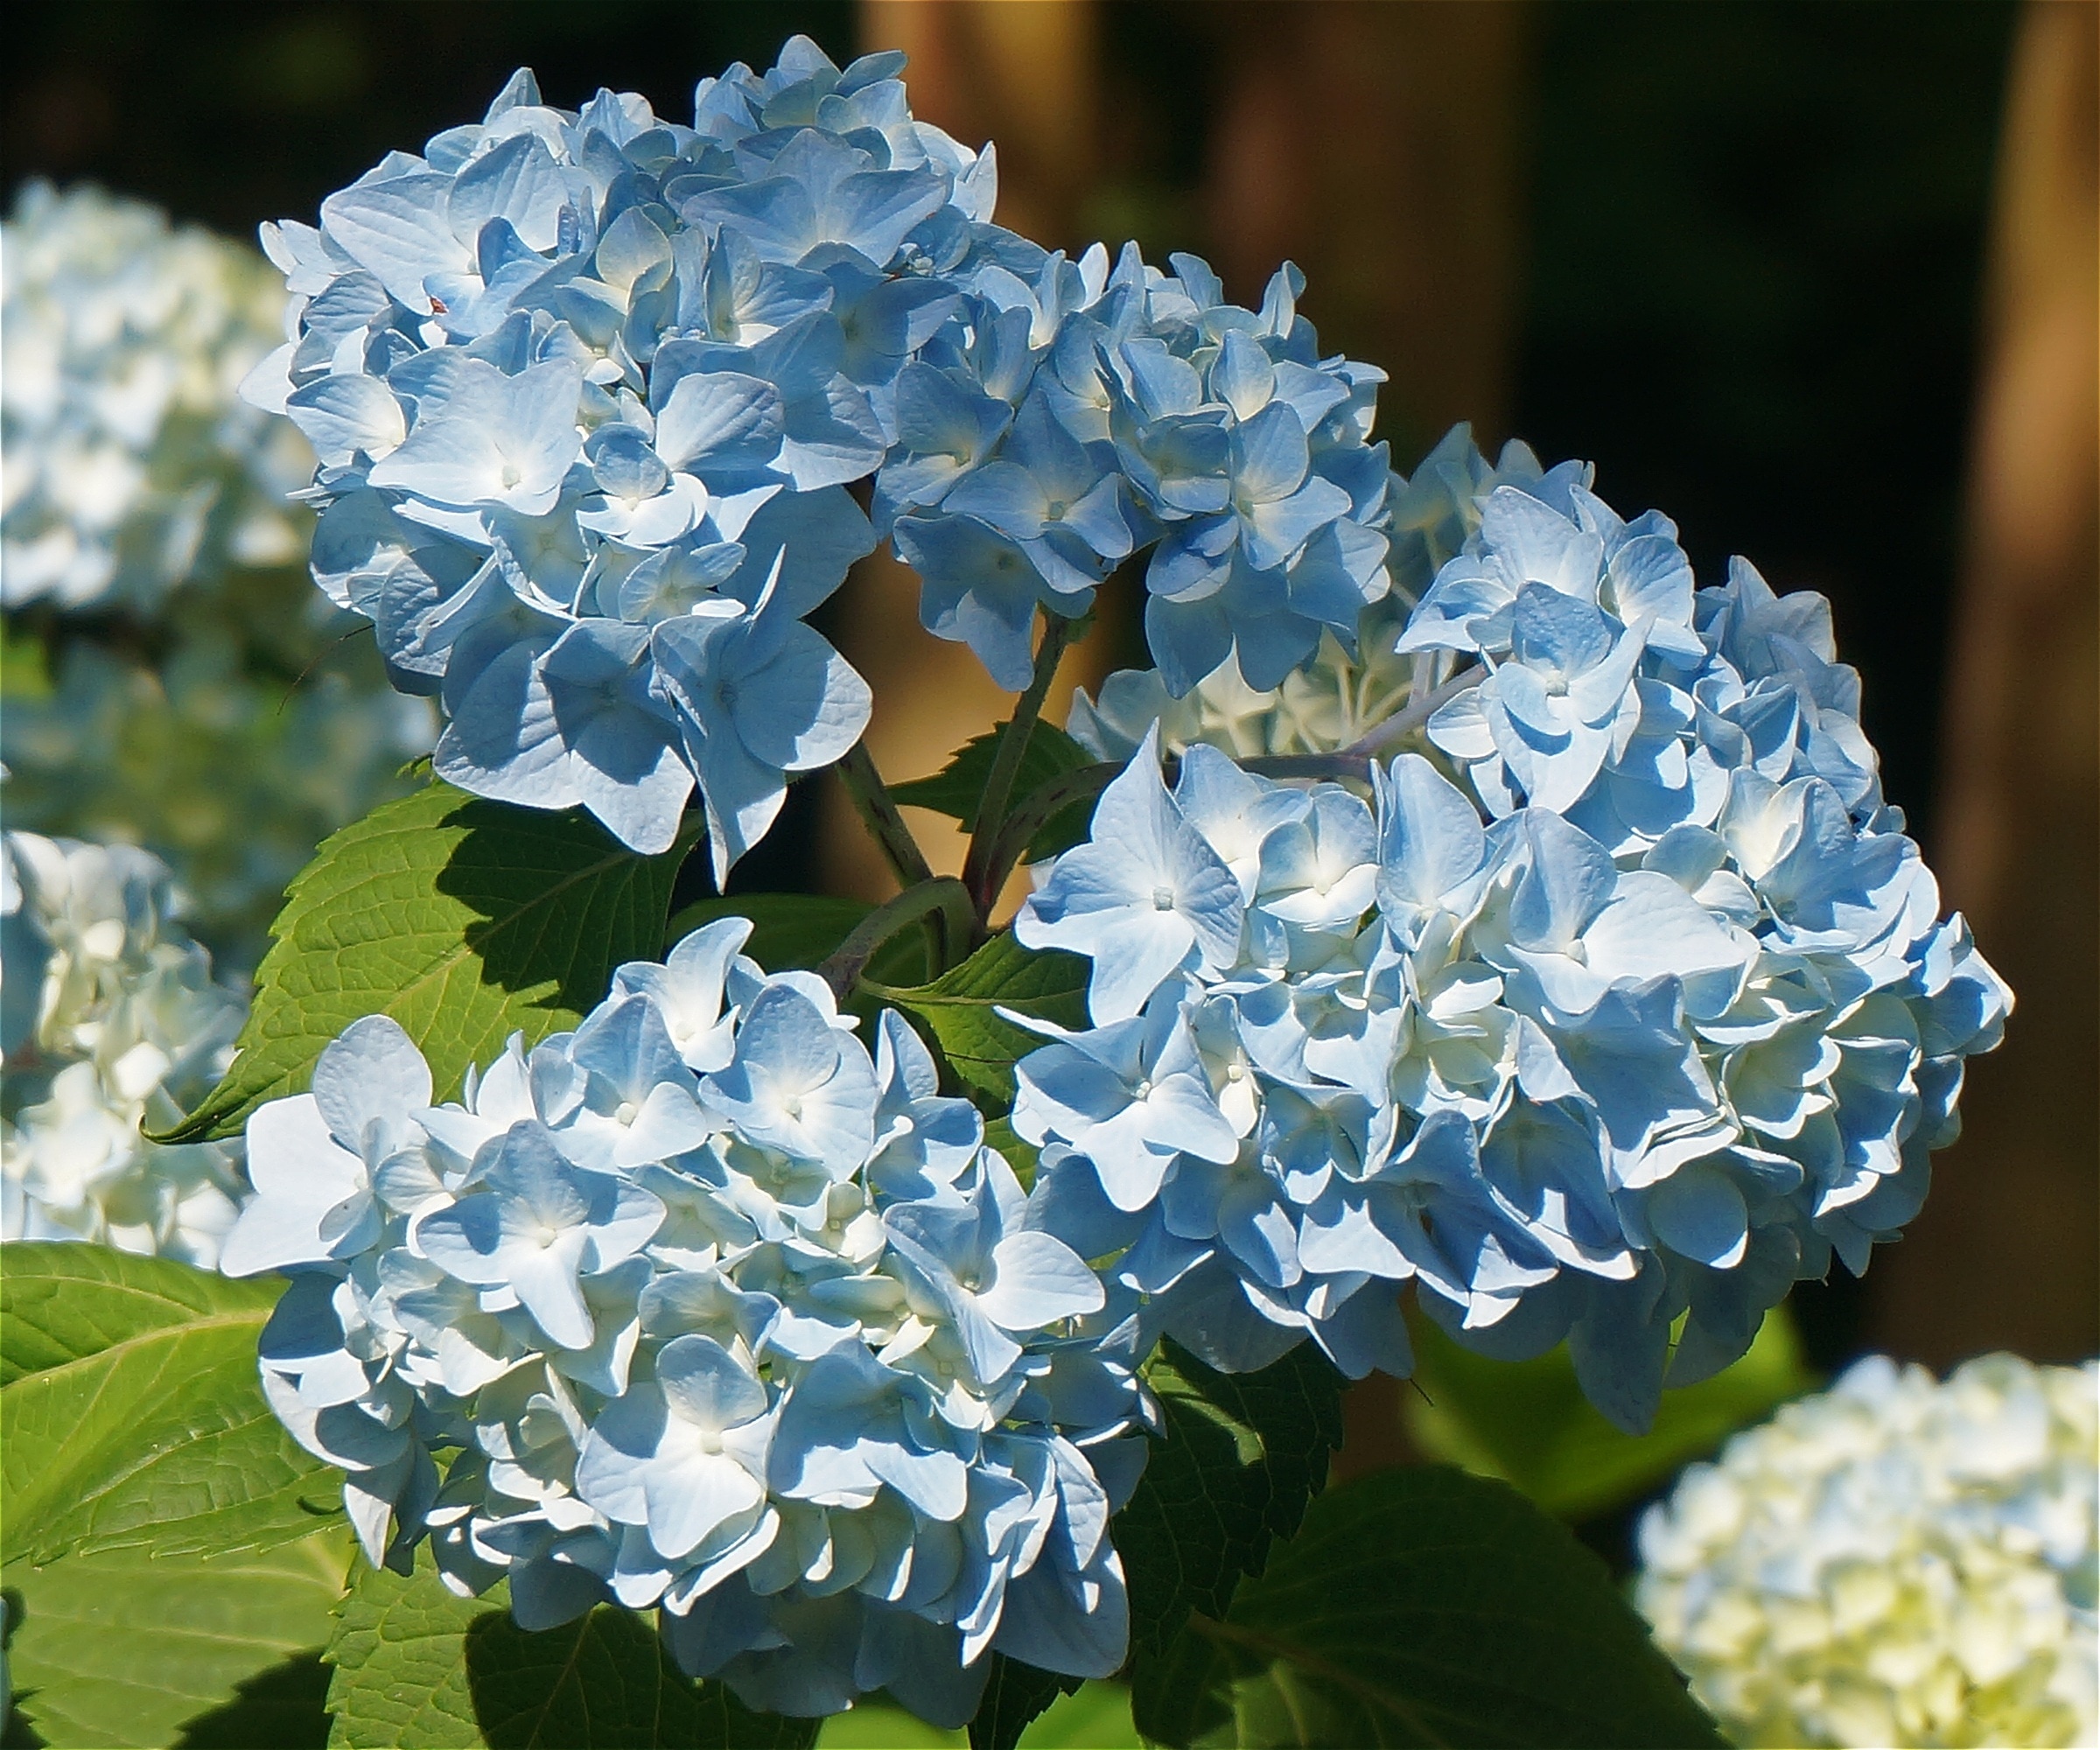 blue and white petaled flower